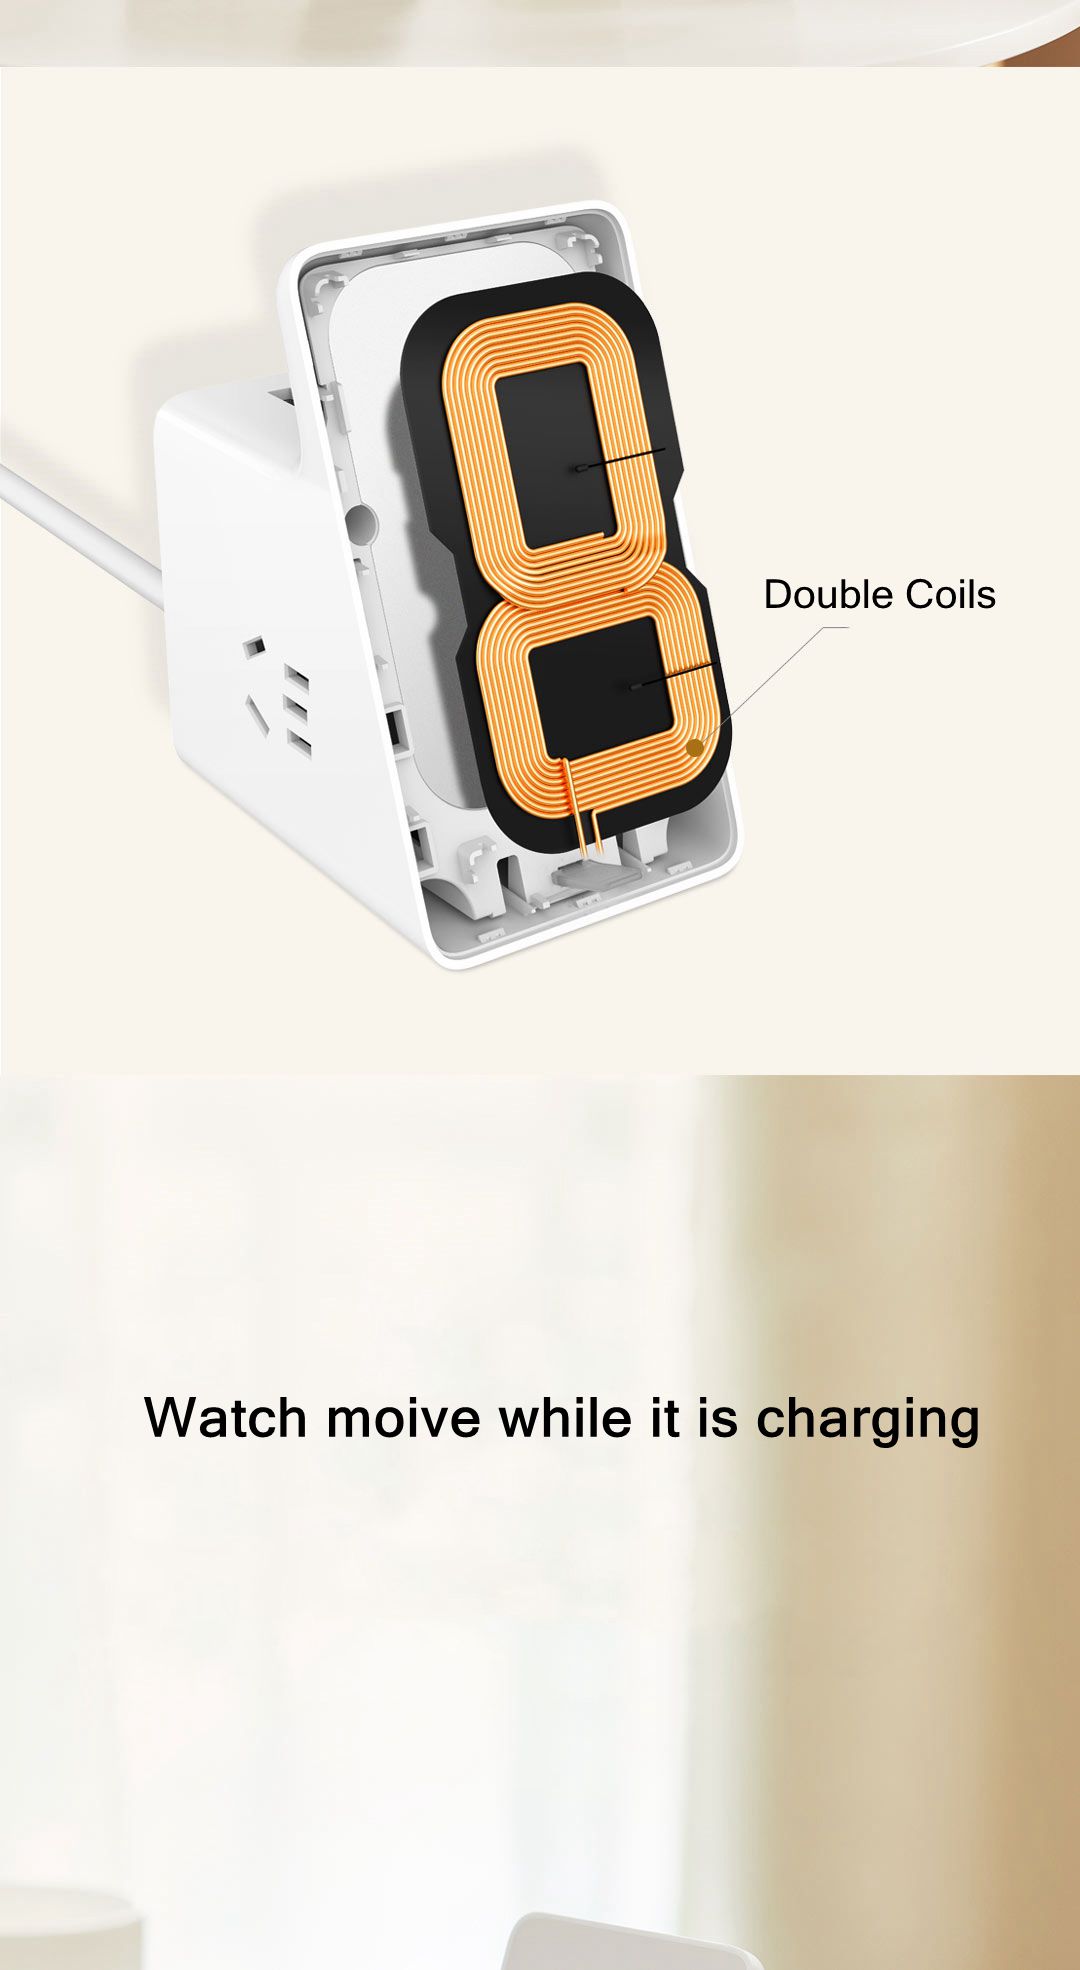 Original-Xiaomi-Power-Strip-Socket-With-International-Outlet--18W-3-Port-USB-Charger--10W-Double-Coi-1747507